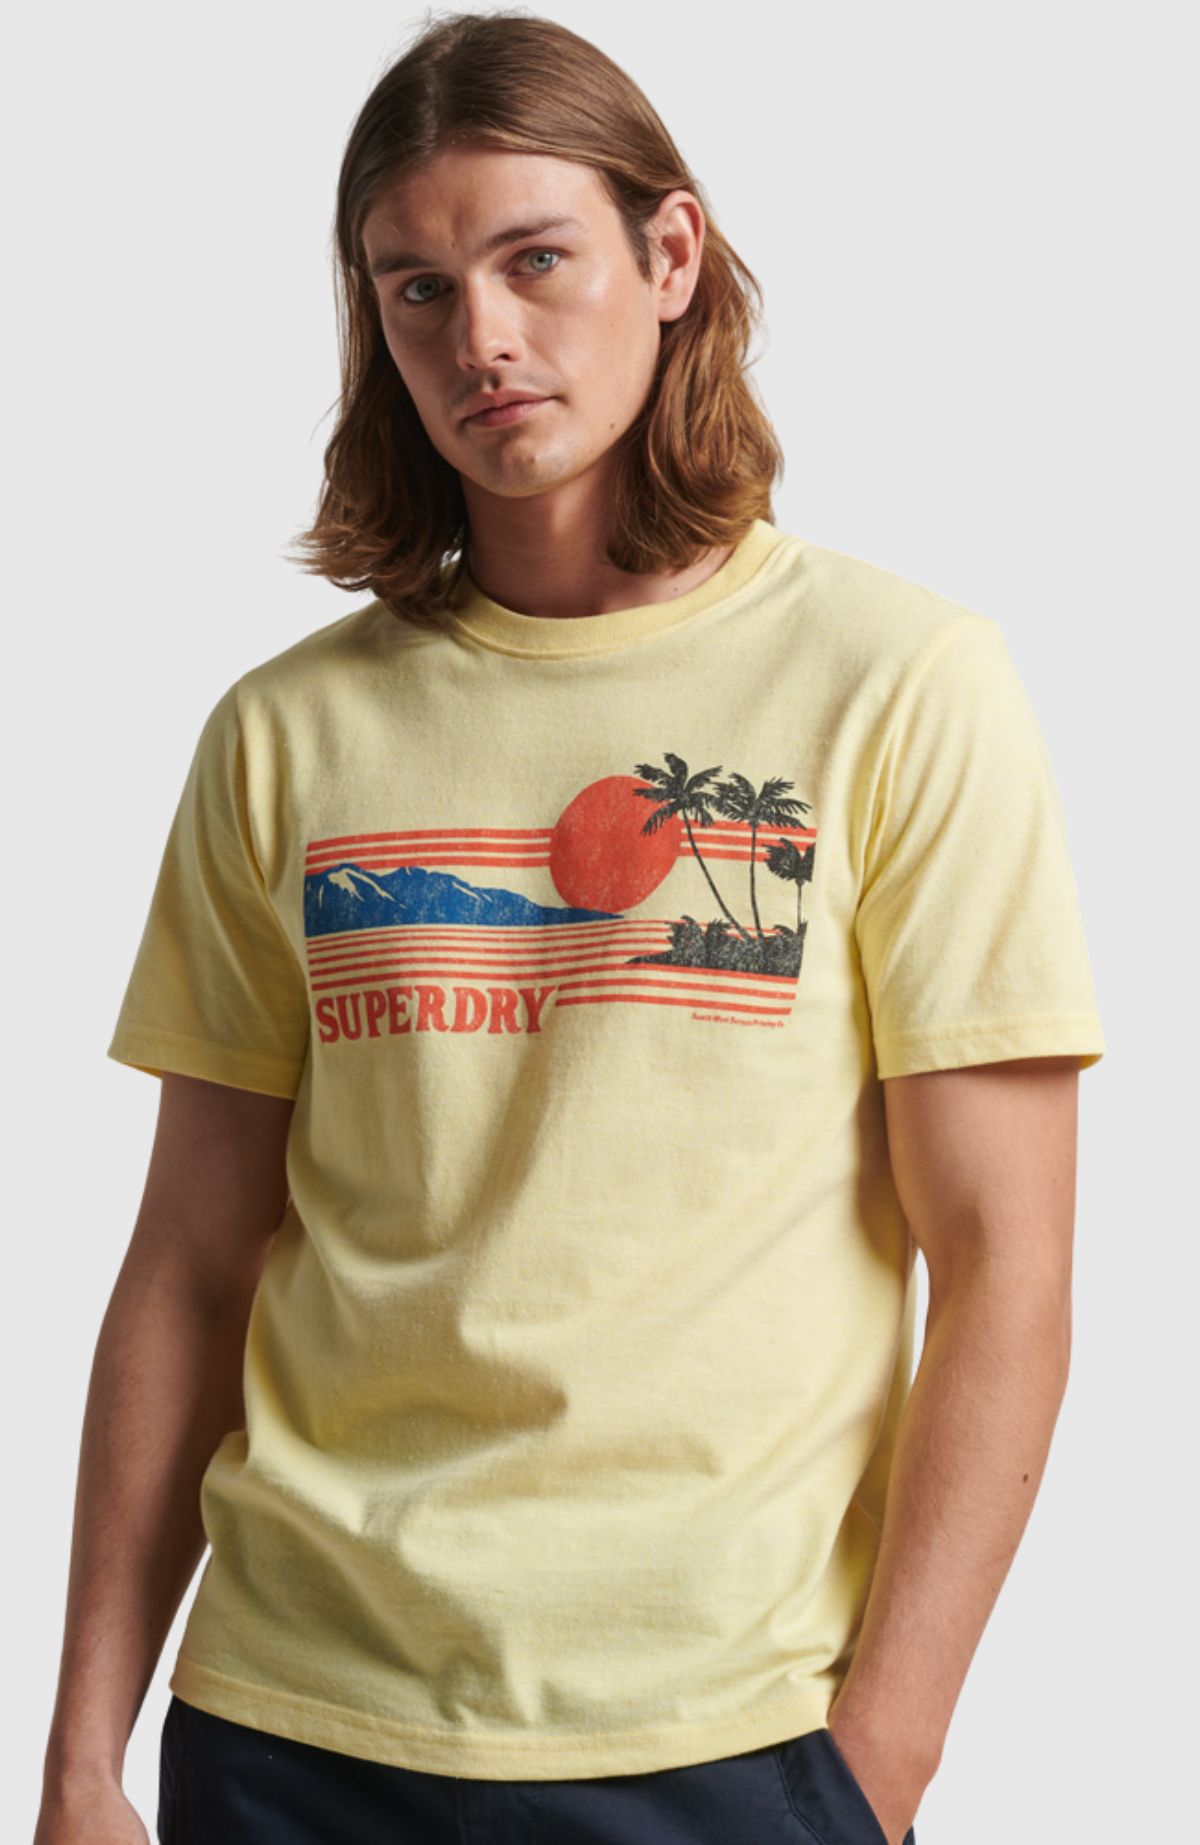 Vintage Great Outdoors Tee - Maxx Group